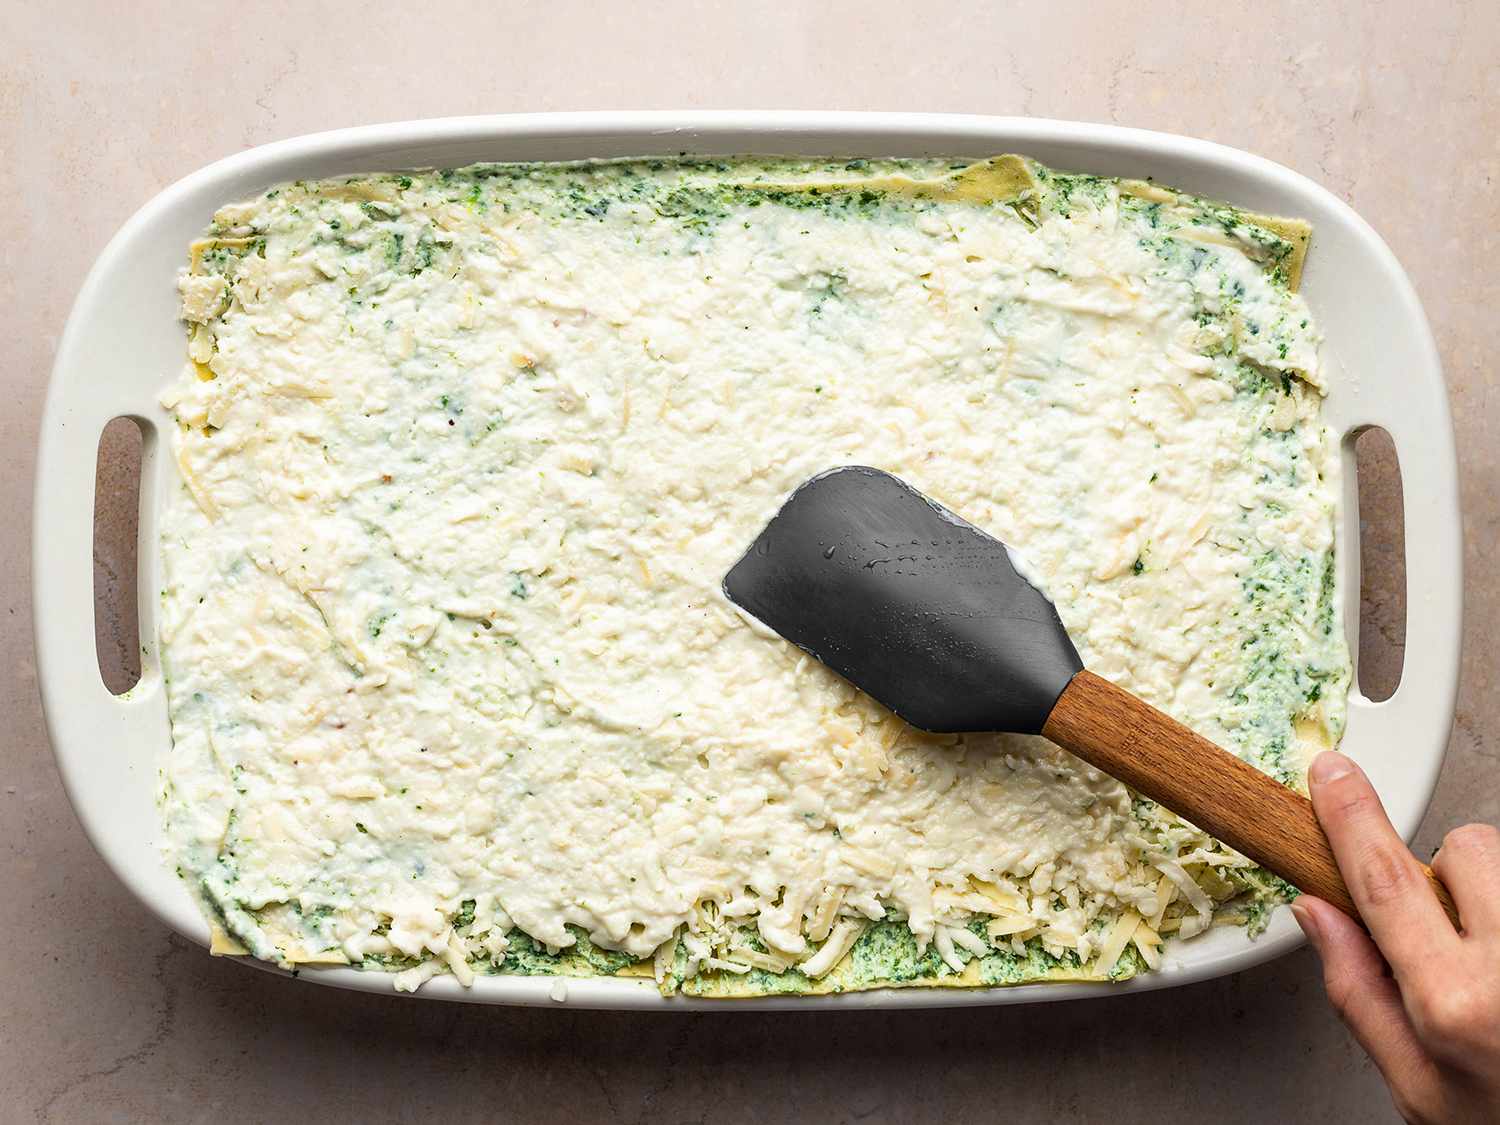 The lasagna in a baking dish with the final layer of cheese being applied to the surface.